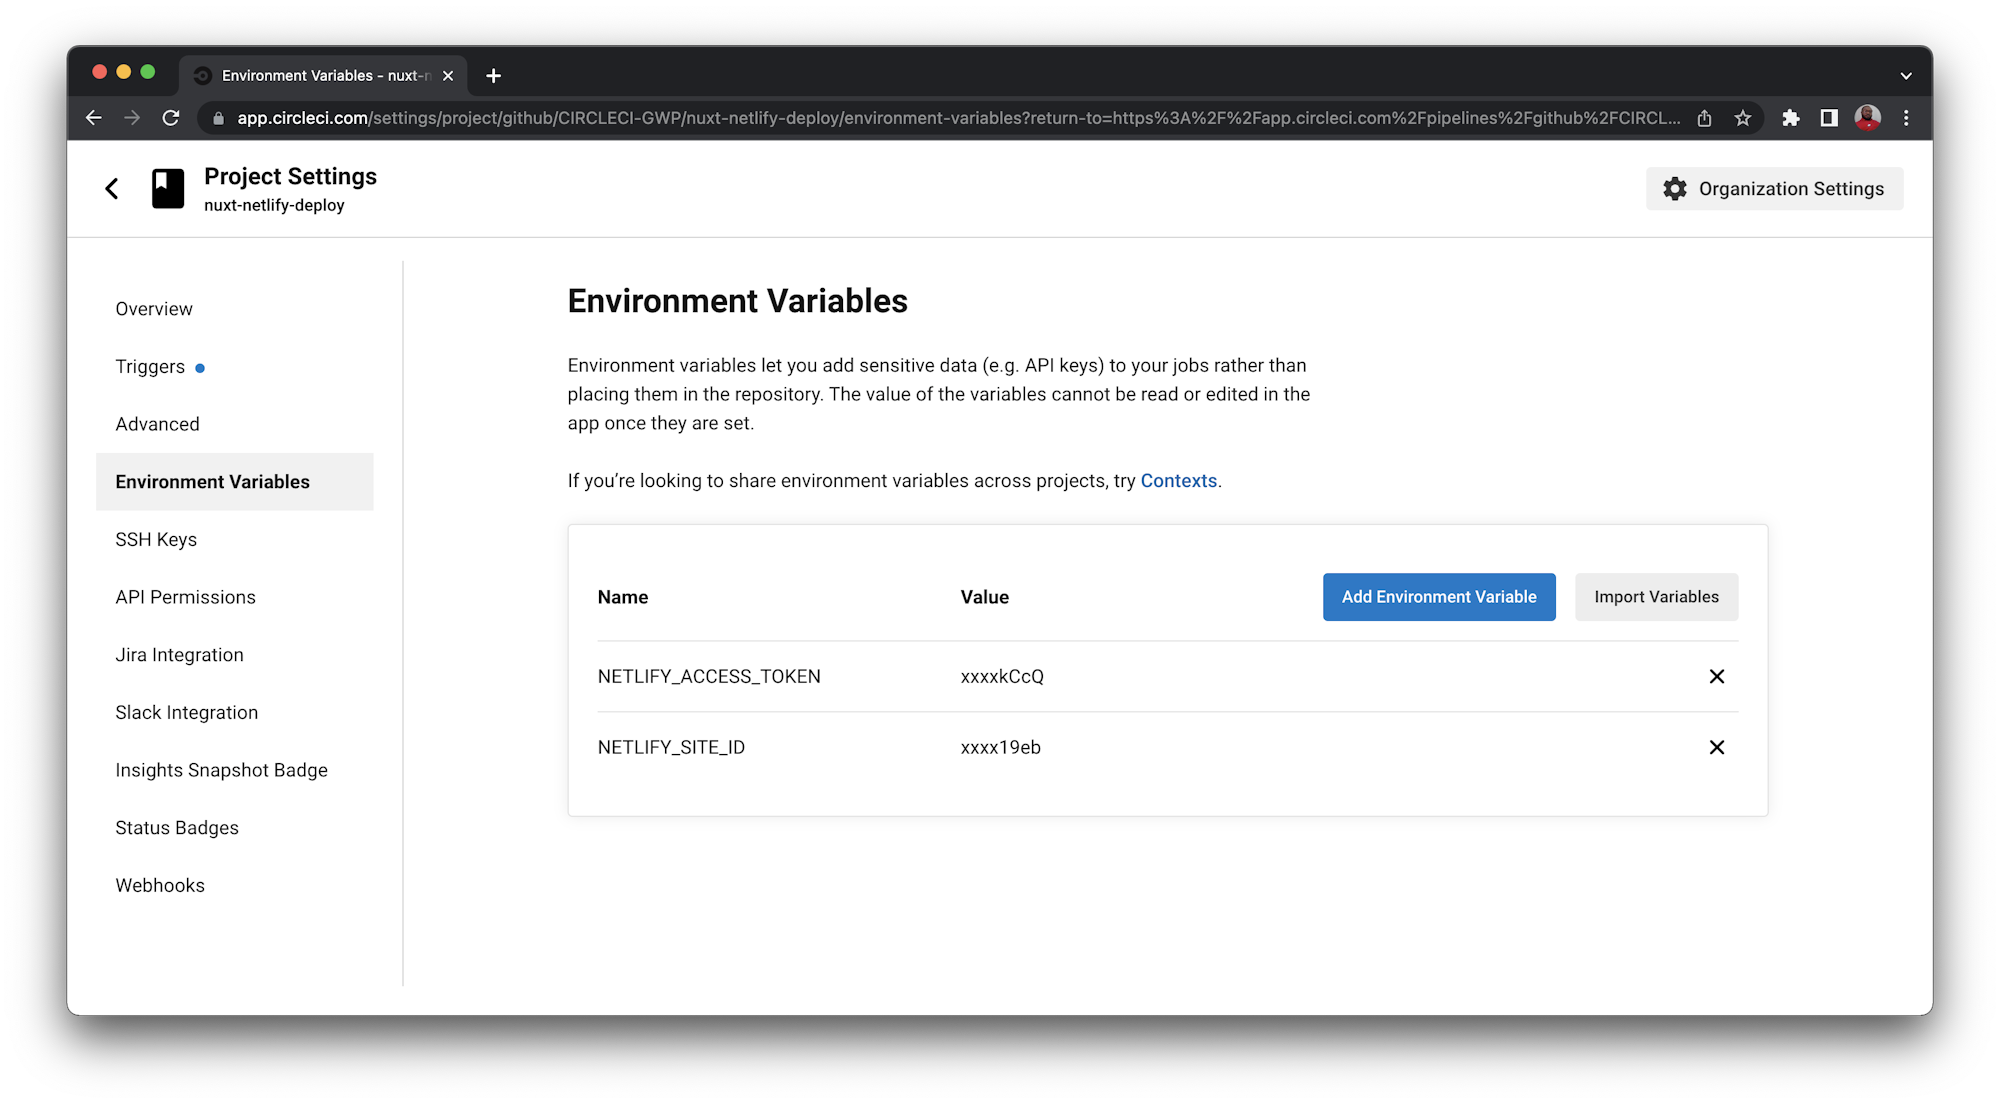 Environment Variables page